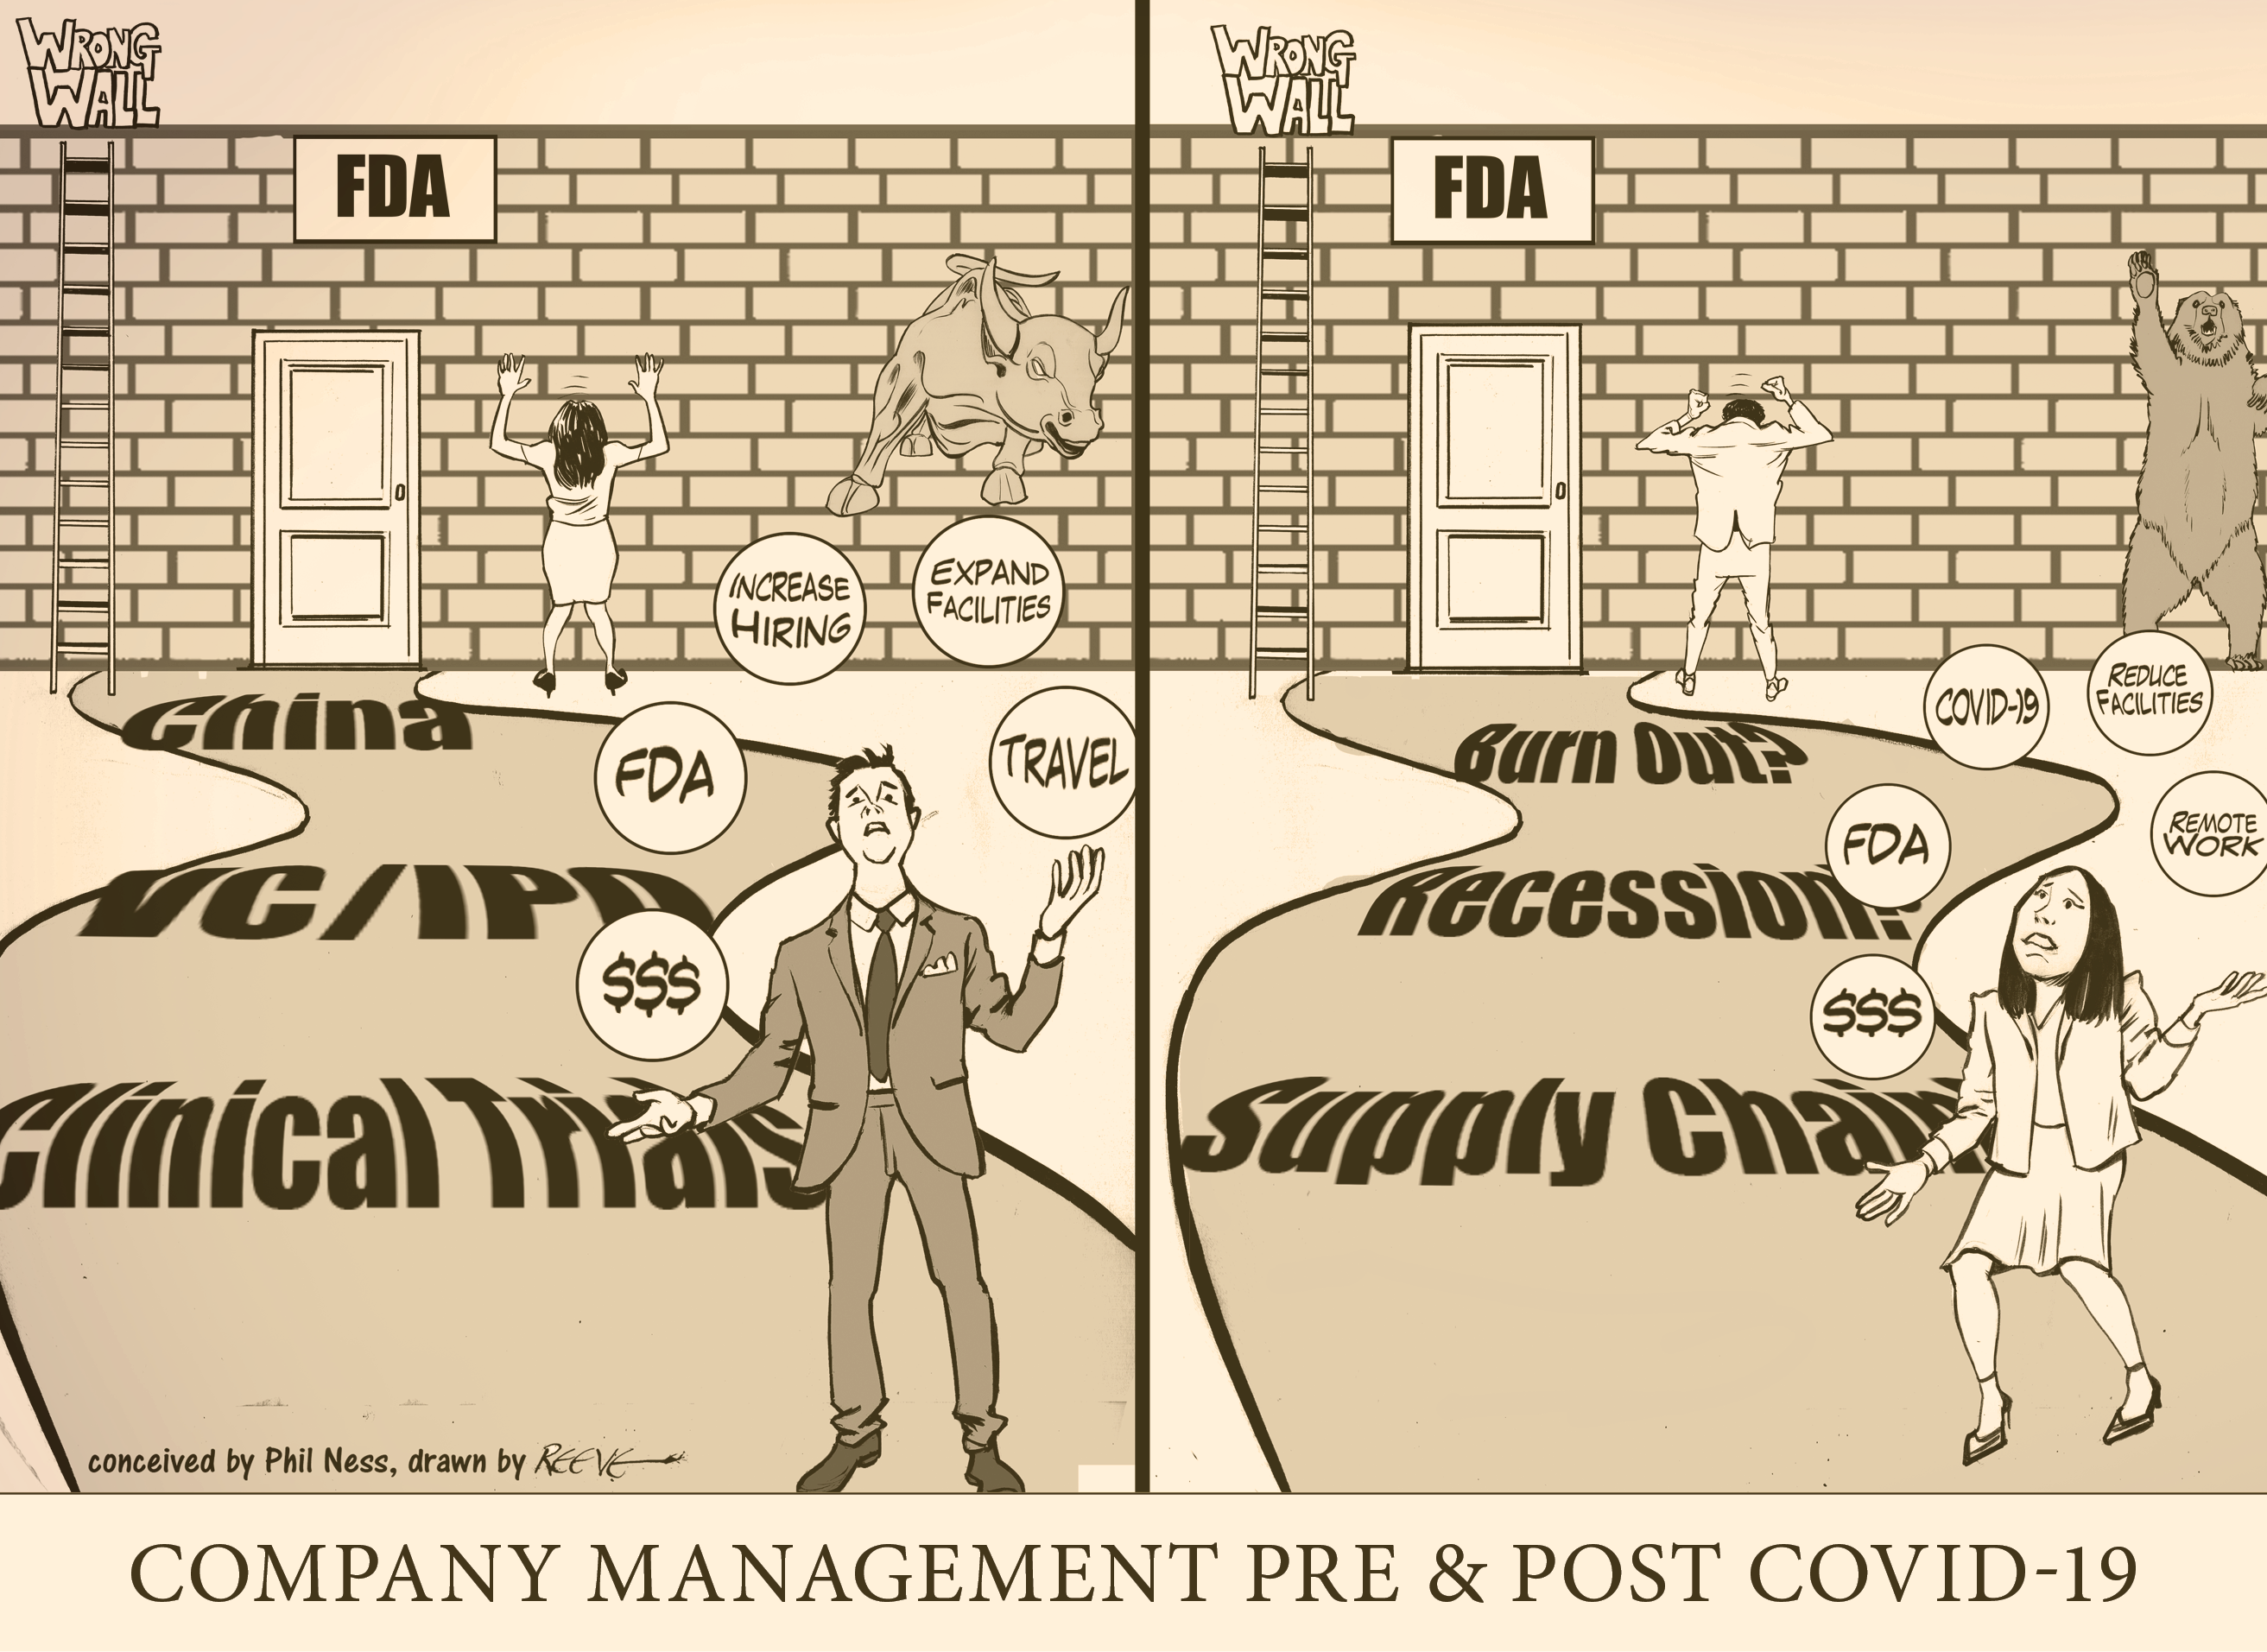 Cartoon: Company Management Pre- and Post-COVID-19, Panel 4 of 4, Conceived by Phil Ness, drawn by Reeve, 2022.